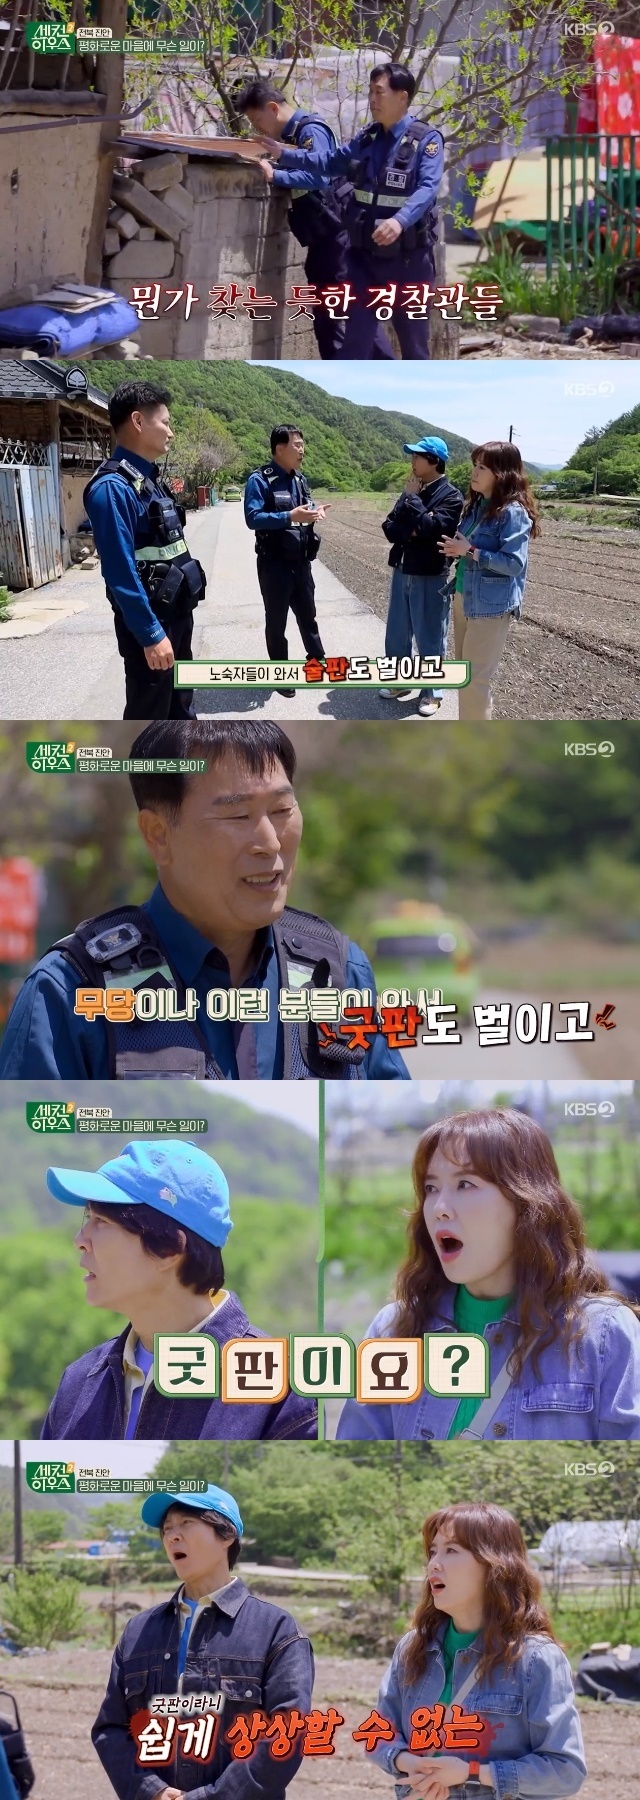 Choi Soo-jong Ha Hee-ra was shocked to hear that the police had Super Wings in 3-Iron where the couple was neglected.In the second KBS 2TV entertainment second House broadcast on June 8, Choi Soo-jong and Ha Hee-ra, who go to 3-Iron to sell their own products to find secondHouse to realize romance in Jeonbuk Jinan, were drawn.On this day, Choi Soo-jong and Ha Hee-ra found a parked police car in a village while selling their products.Choi Soo-jong, who witnessed police officers who seemed to be looking for something, carefully guessed, What is happening here in the village?The couple approached the police officer and asked, We came down and saw the police car for the first time. What happened? The two police officers said, We are patrolling during the day to prevent 3-Iron hair.Teenagers and homeless people come once in a while to make a drink, and a shaman or such people come and make a pig head and a good plate, explained Super Wings.Choi Soo-jong, who opened his mouth, was surprised and asked, Is not it your house? The police officer surprised me by saying, I come to a place where I have a gigantic place to receive a flag and secretly leave it without permission.